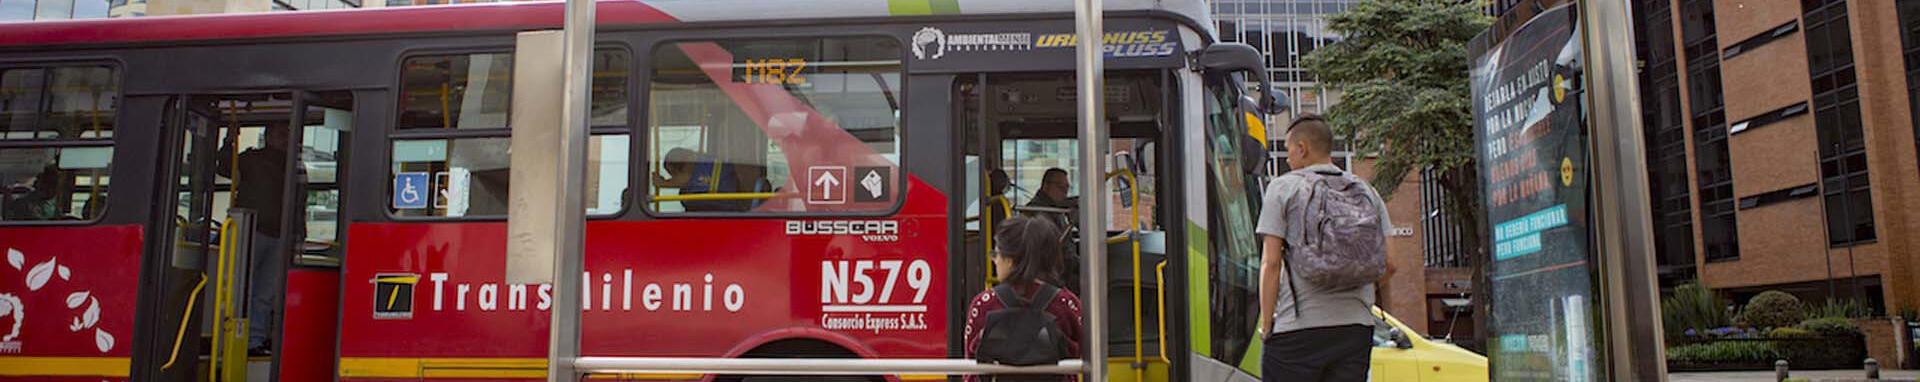 CIF Action Hybrid Bus in Bogotá, Colombia. 2018